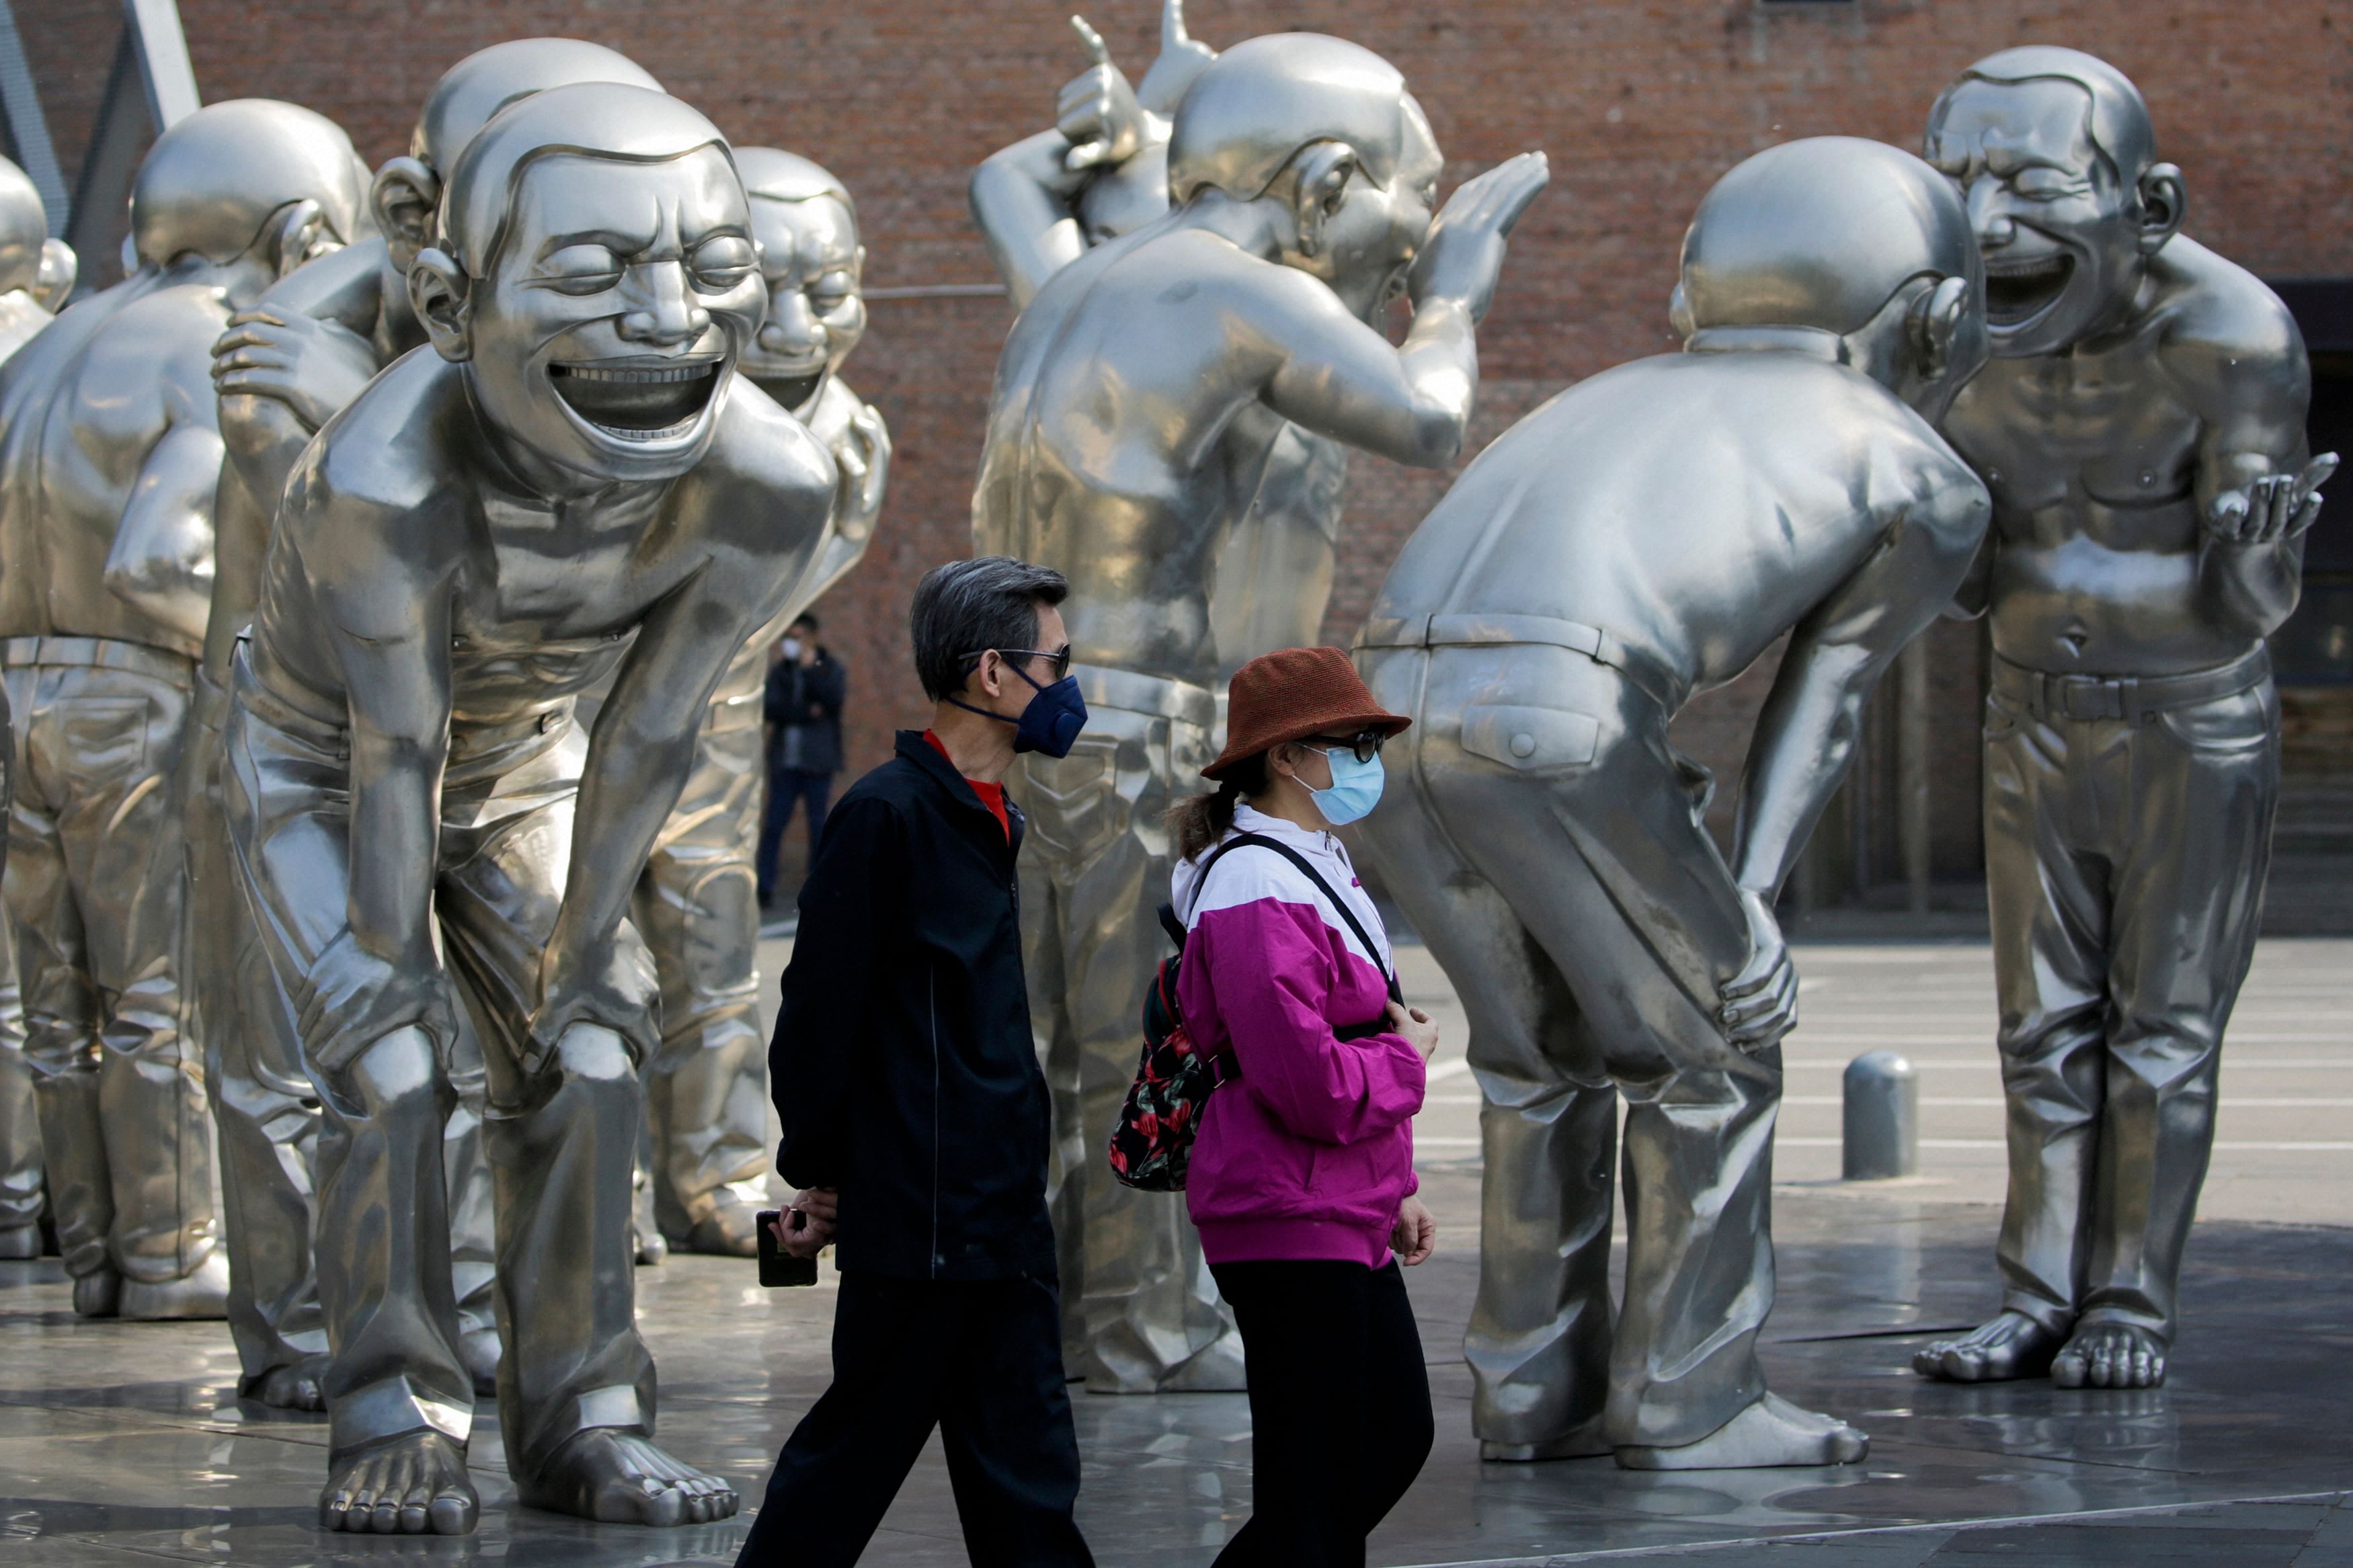 People wearing protective face masks to help curb the spread of the new coronavirus walk by human sculptures on display outside an art gallery in Beijing. (Credit: AP Photo)